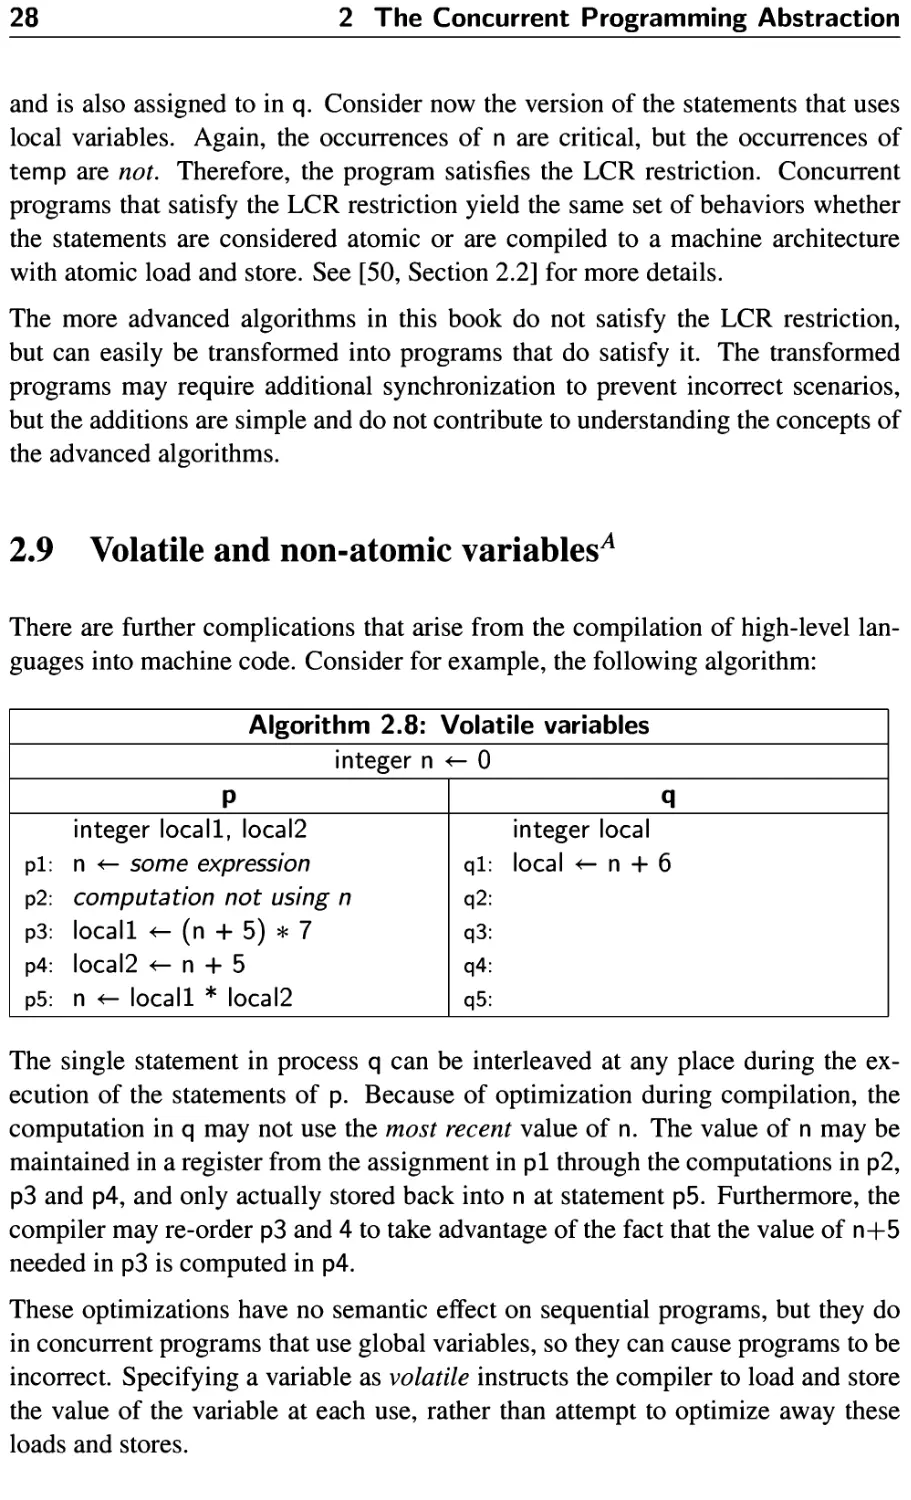 2.9 Volatile and non-atomic variables